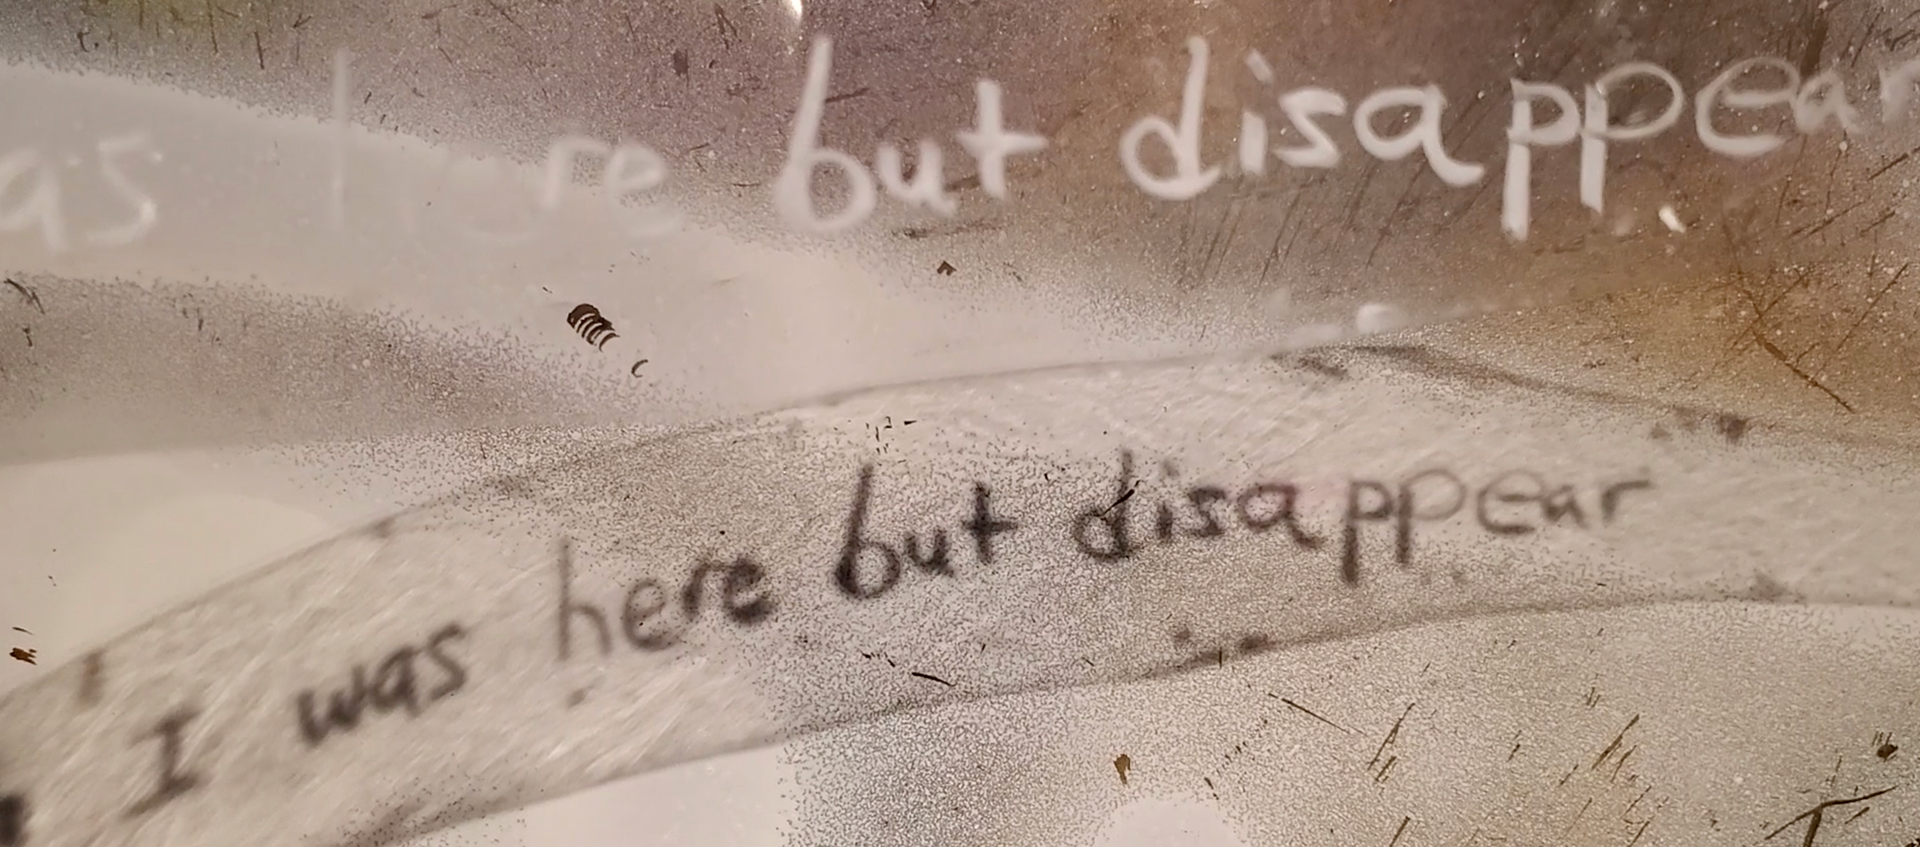 The words “I was here but disappear” written twice against a grainy, scratched background of brown shades.